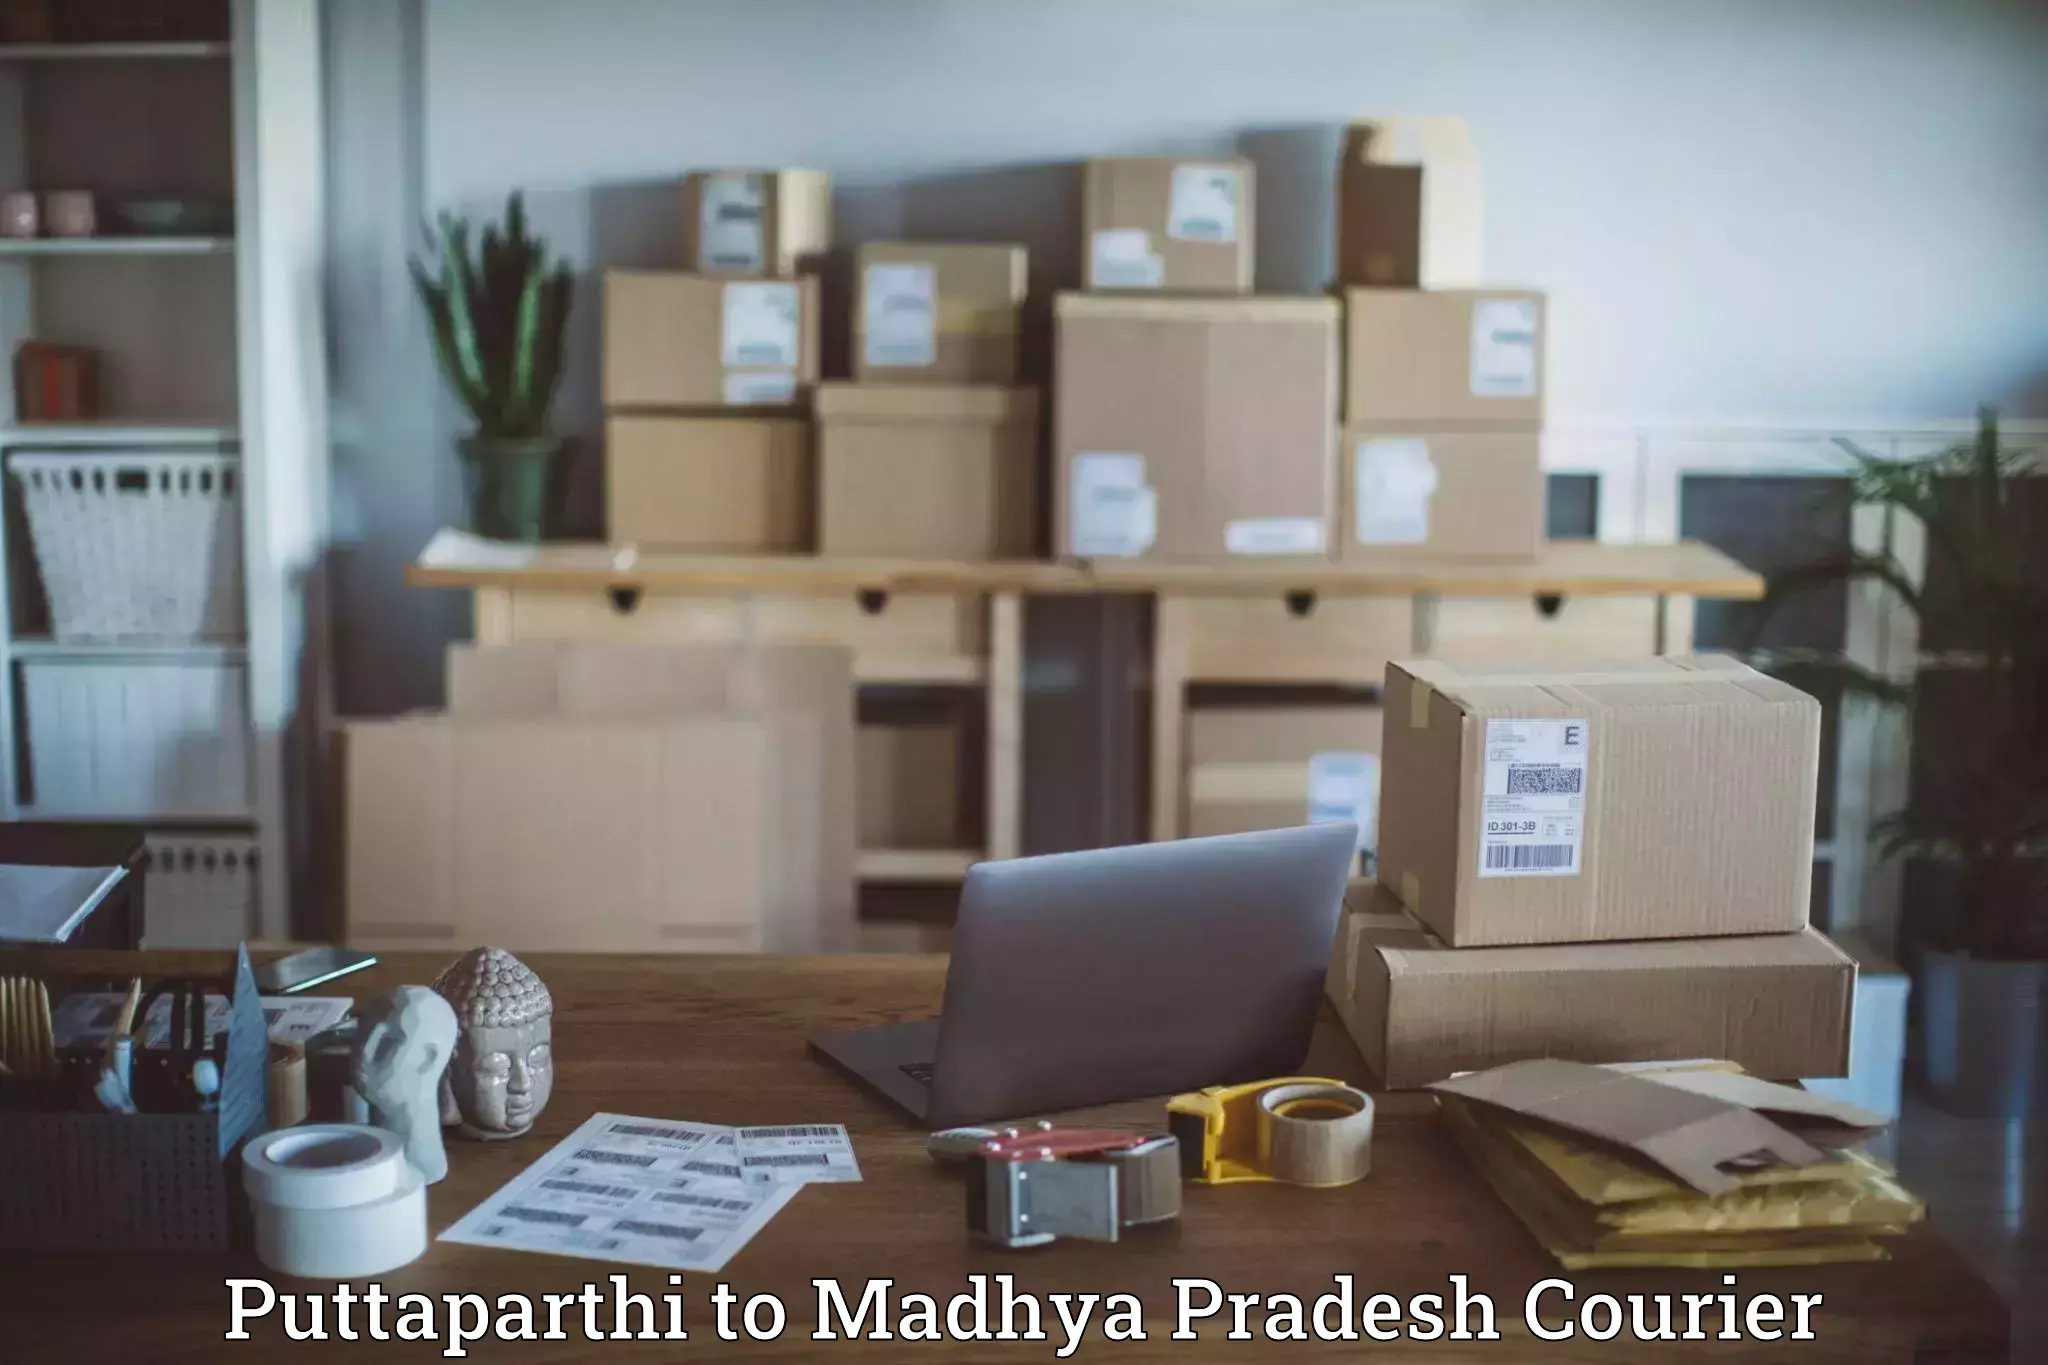 Reliable delivery network Puttaparthi to Pithampur